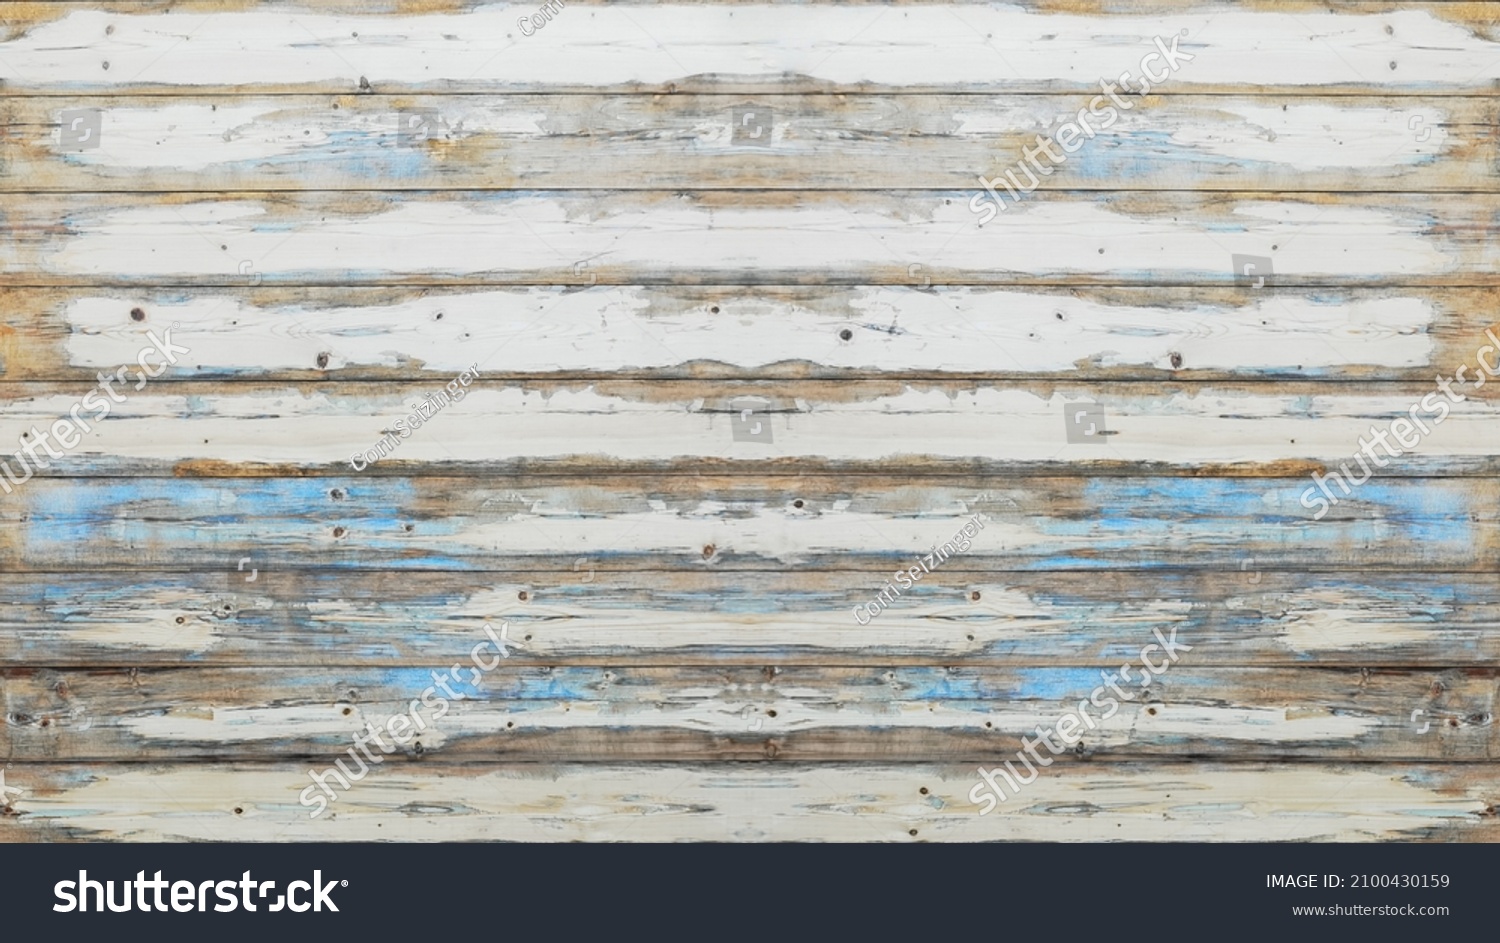 old white painted exfoliate rustic bright light wooden texture - wood background shabby	
 #2100430159